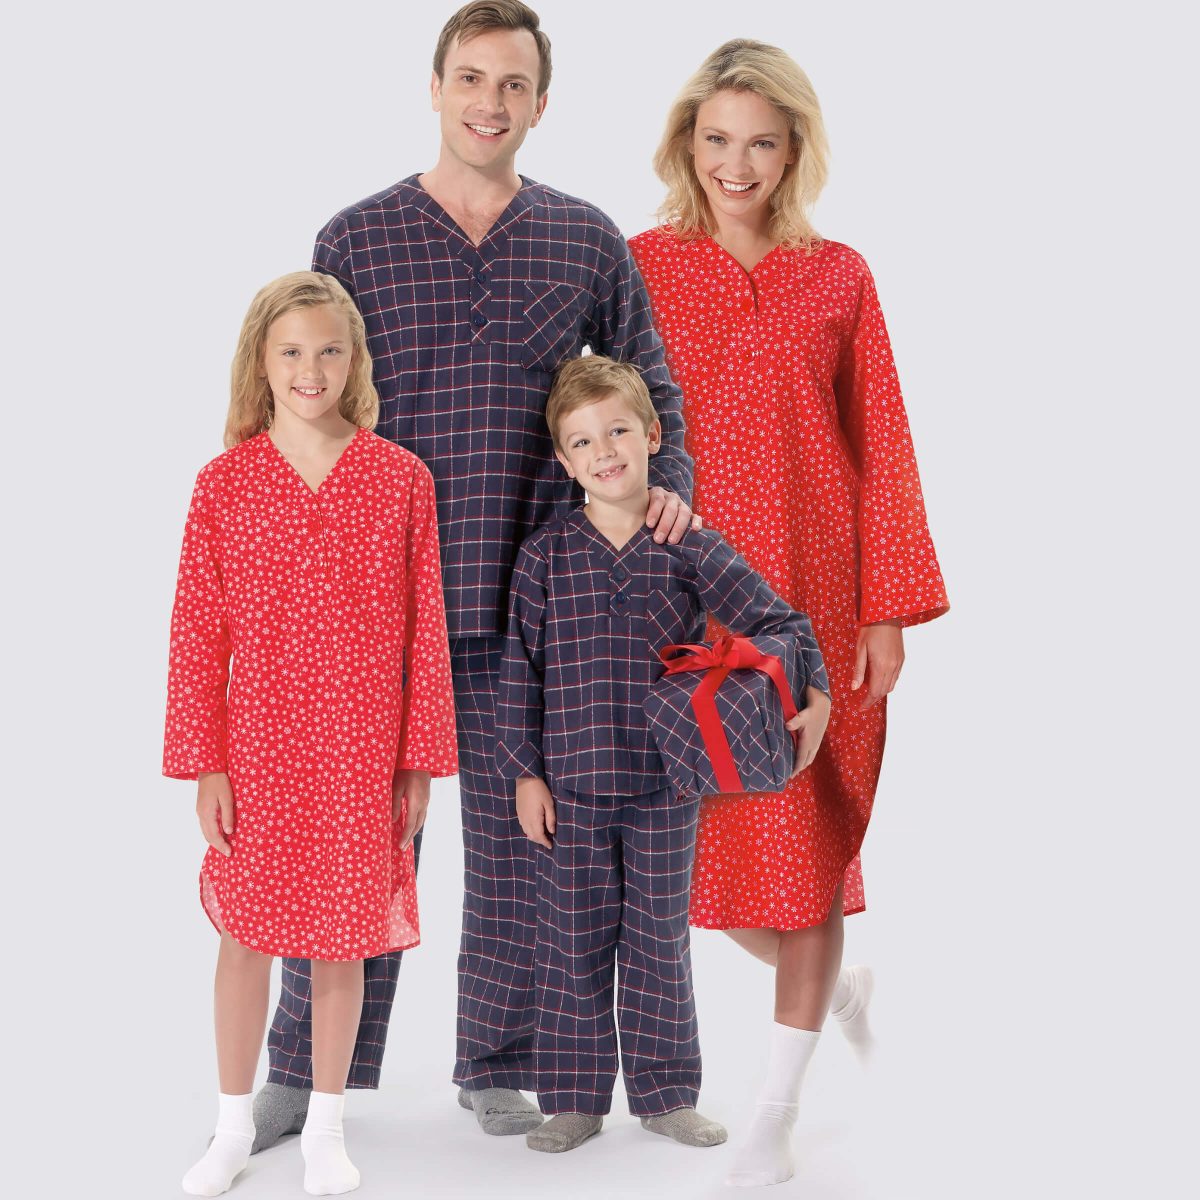 Simplicity Sewing Pattern S9211 Misses'/Men's/Boys'/Girls' Patch Pocket Top, Nightshirt and Trousers